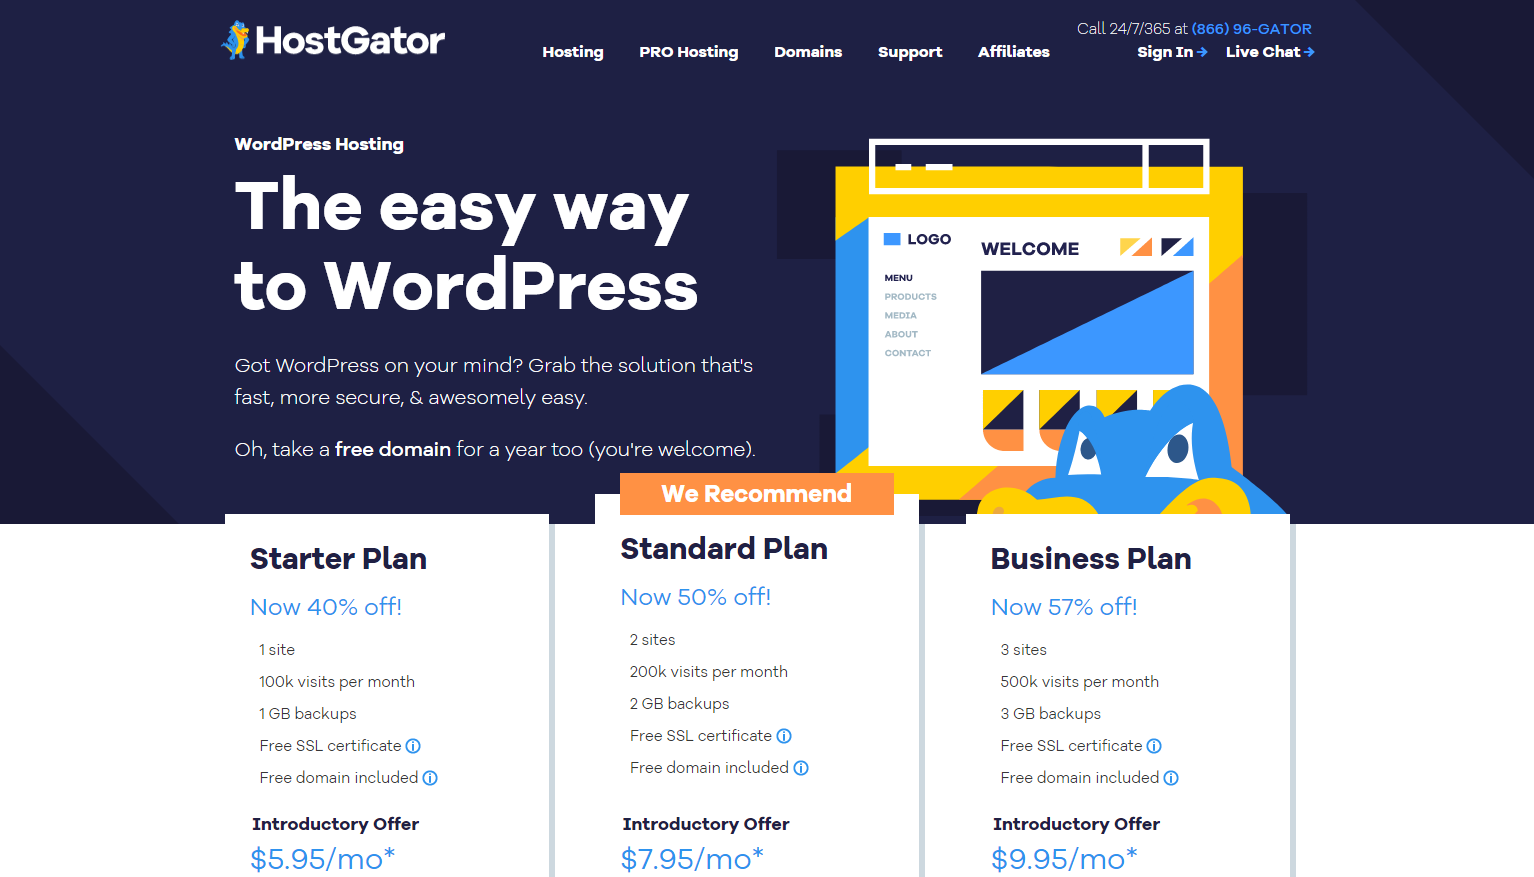 With HostGator's WordPress hosting offering, you also have advanced security options, a simplified control panel, and free site migrations. 